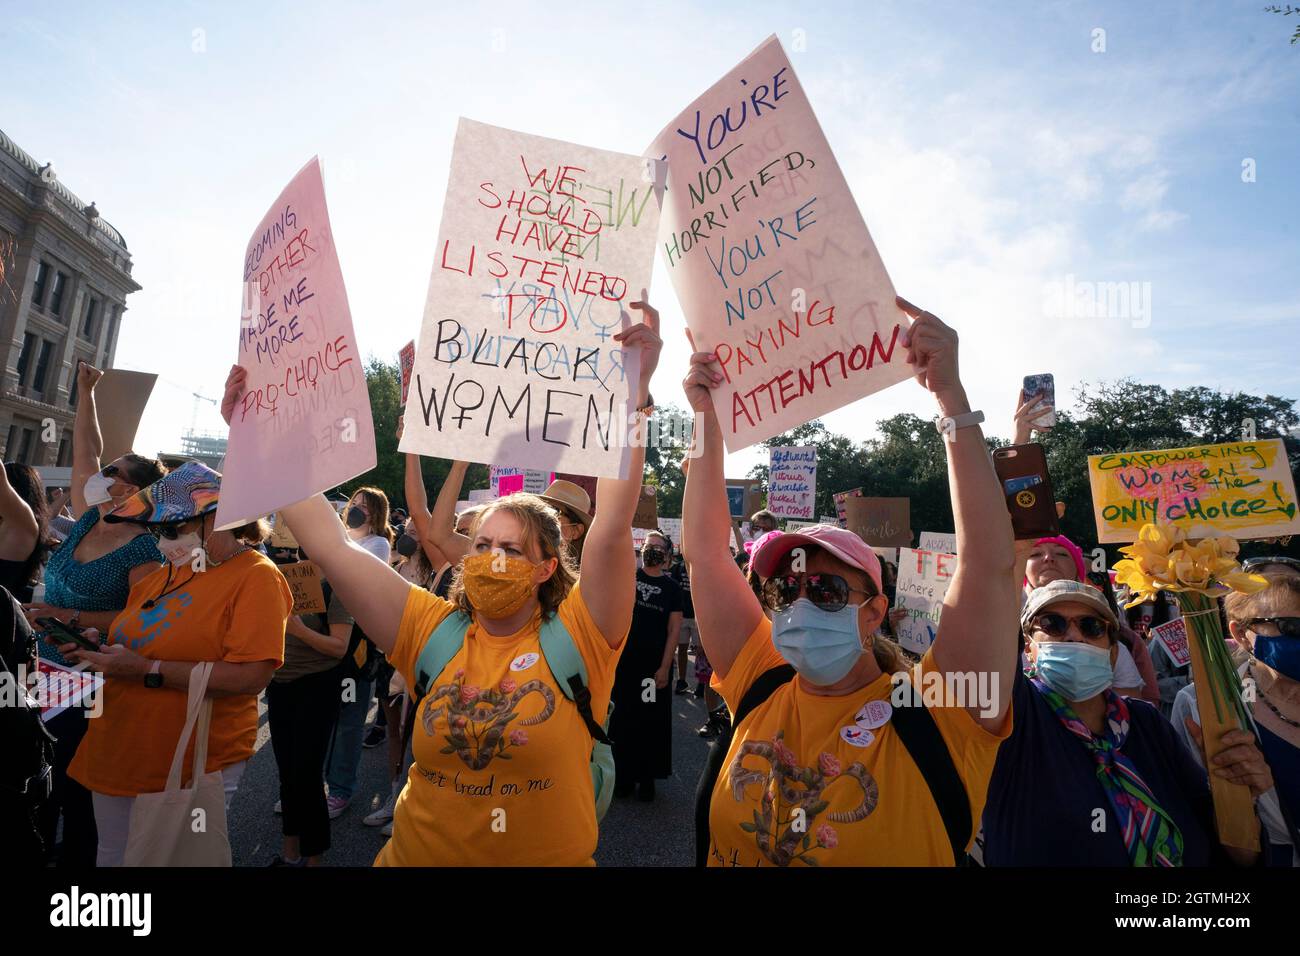 Austin Texas USA, Oct. 2 2021: Several thousand Texas women rally at the Capitol south steps to protest recent Texas laws passed restricting women's right to abortion. A restrictive Texas abortion law makes it a crime to have an abortion after six weeks in most cases. Credit: Bob Daemmrich/Alamy Live News Stock Photo